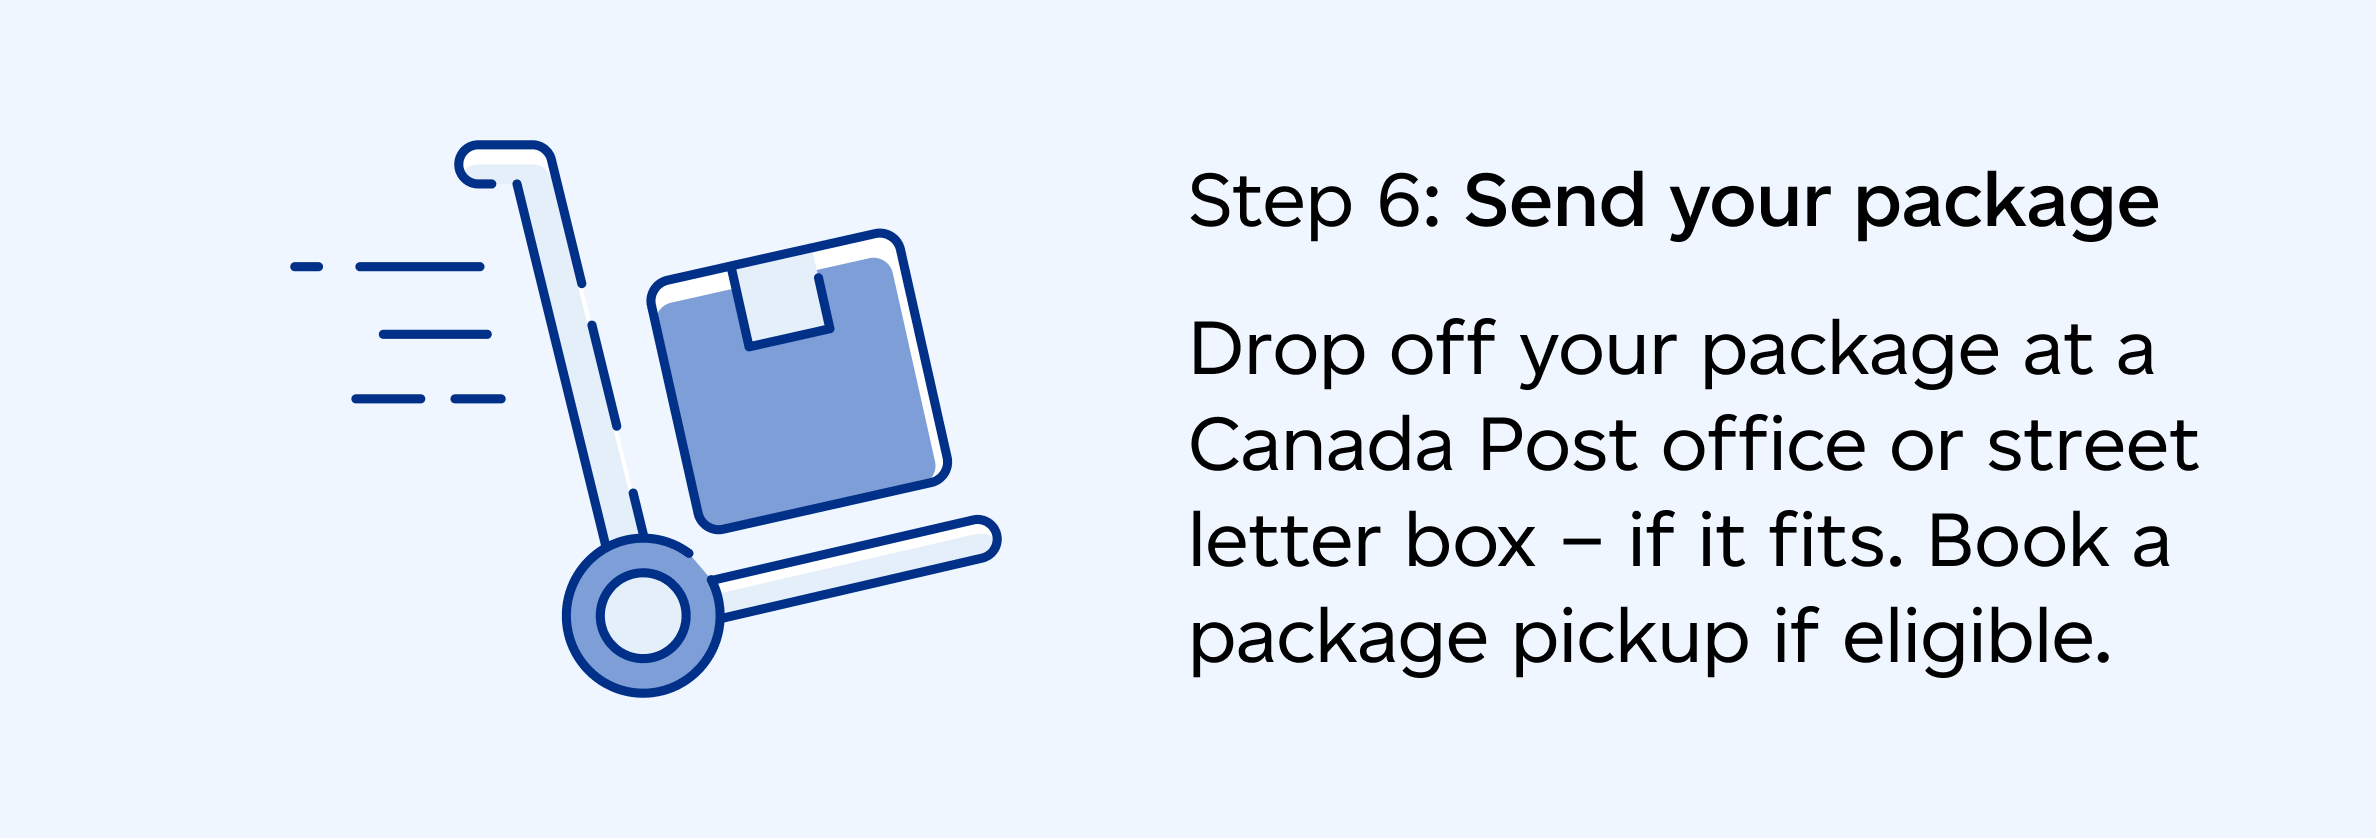 Step 6: Drop off your package at a Canada Post office or street letter box – if it fits. Book a package pickup if eligible.